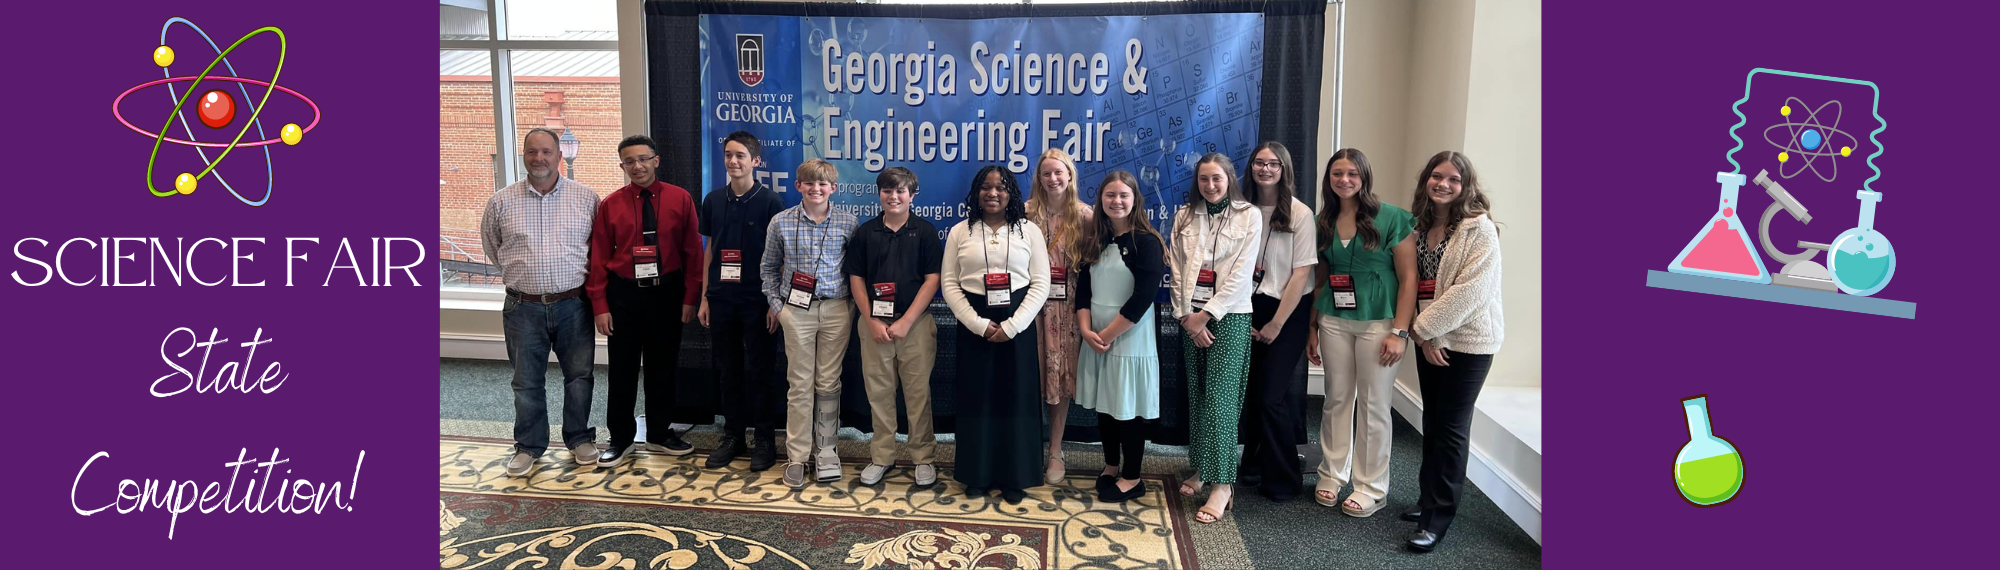 Science Fair State Competition group photo